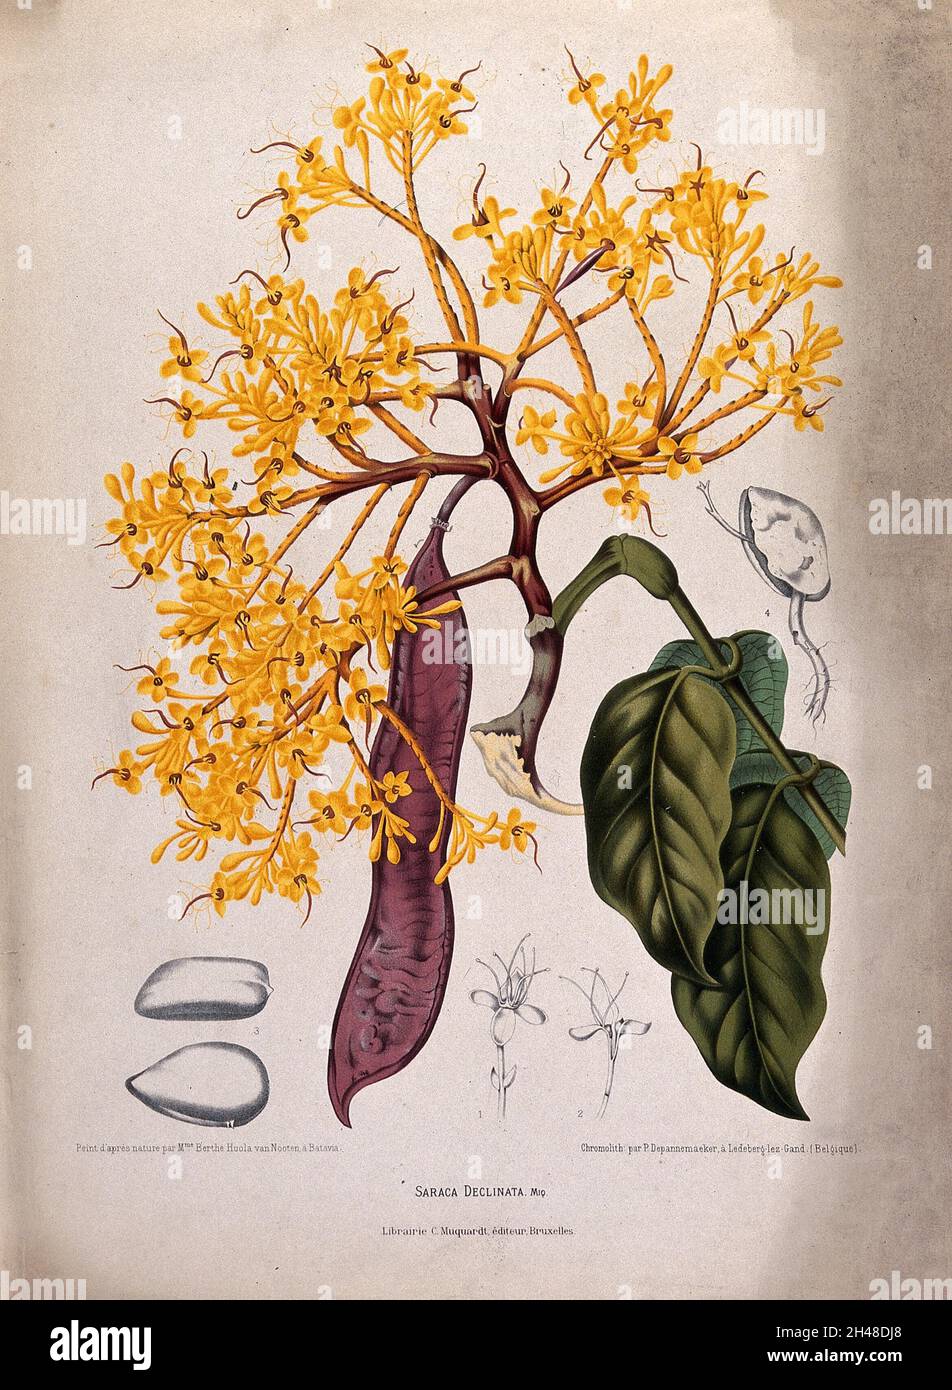 A plant (Saraca declinata Miq.) related to the asoka tree: flowering and fruiting shoot with separate numbered flowers, seeds and germinating seed. Chromolithograph by P. Depannemaeker, c.1885, after B. Hoola van Nooten. Stock Photo